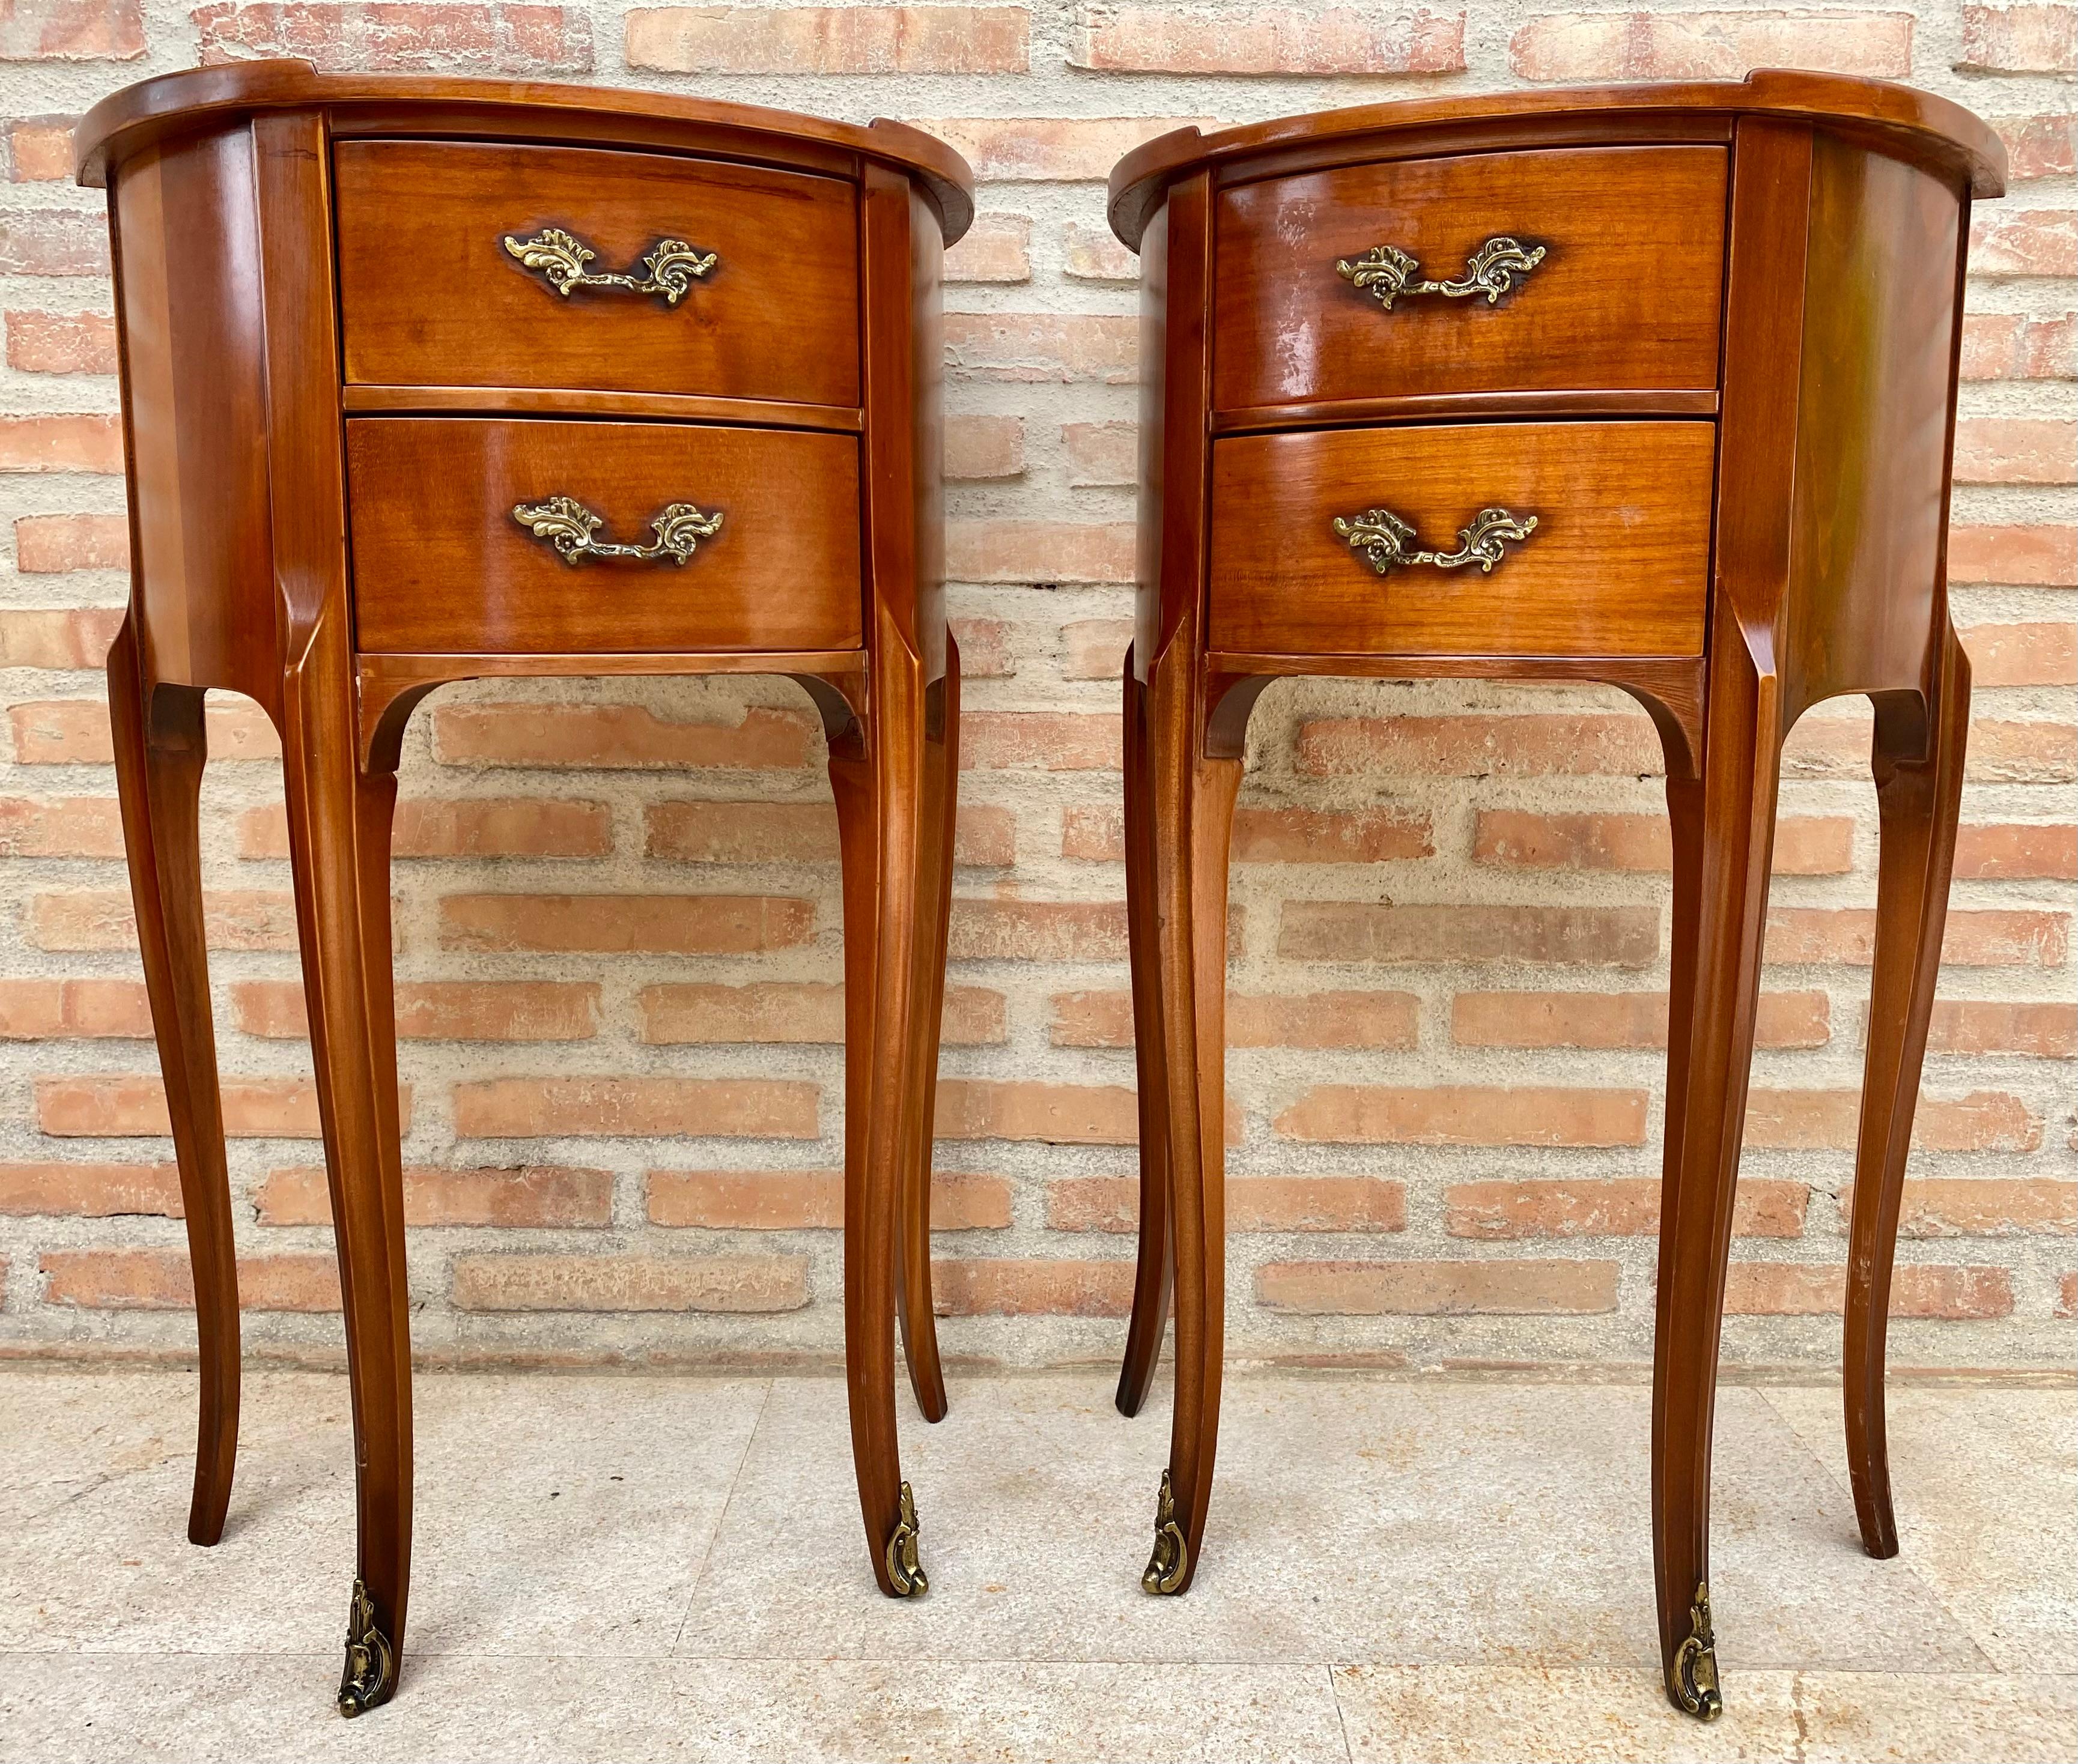 French Provincial French Walnut Demilune Bedside Tables or Nightstands with 2 Drawers, Set of 2